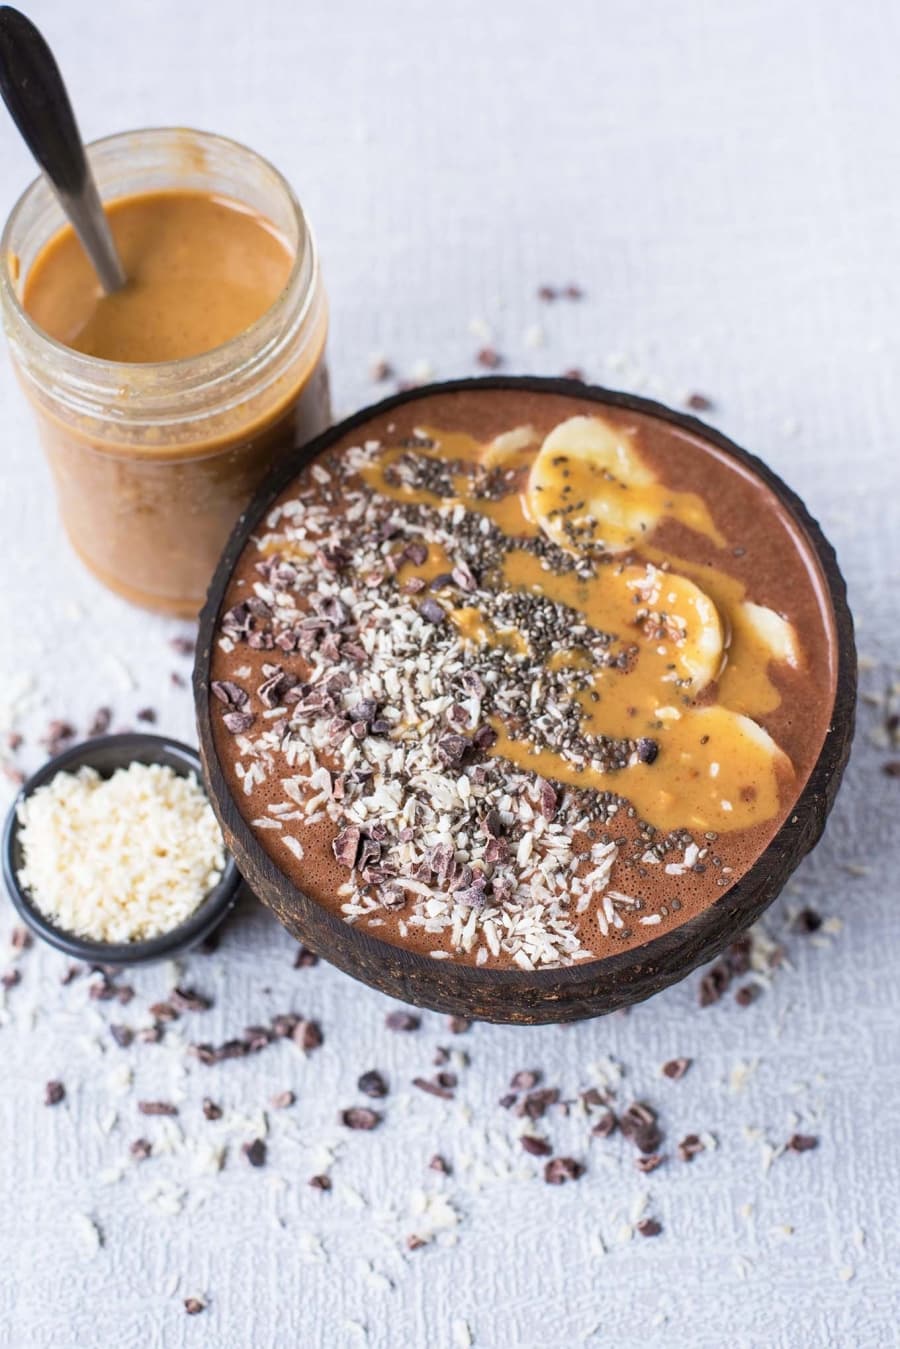 Chocolate Smoothie Bowl next to a jar of peanut butter.